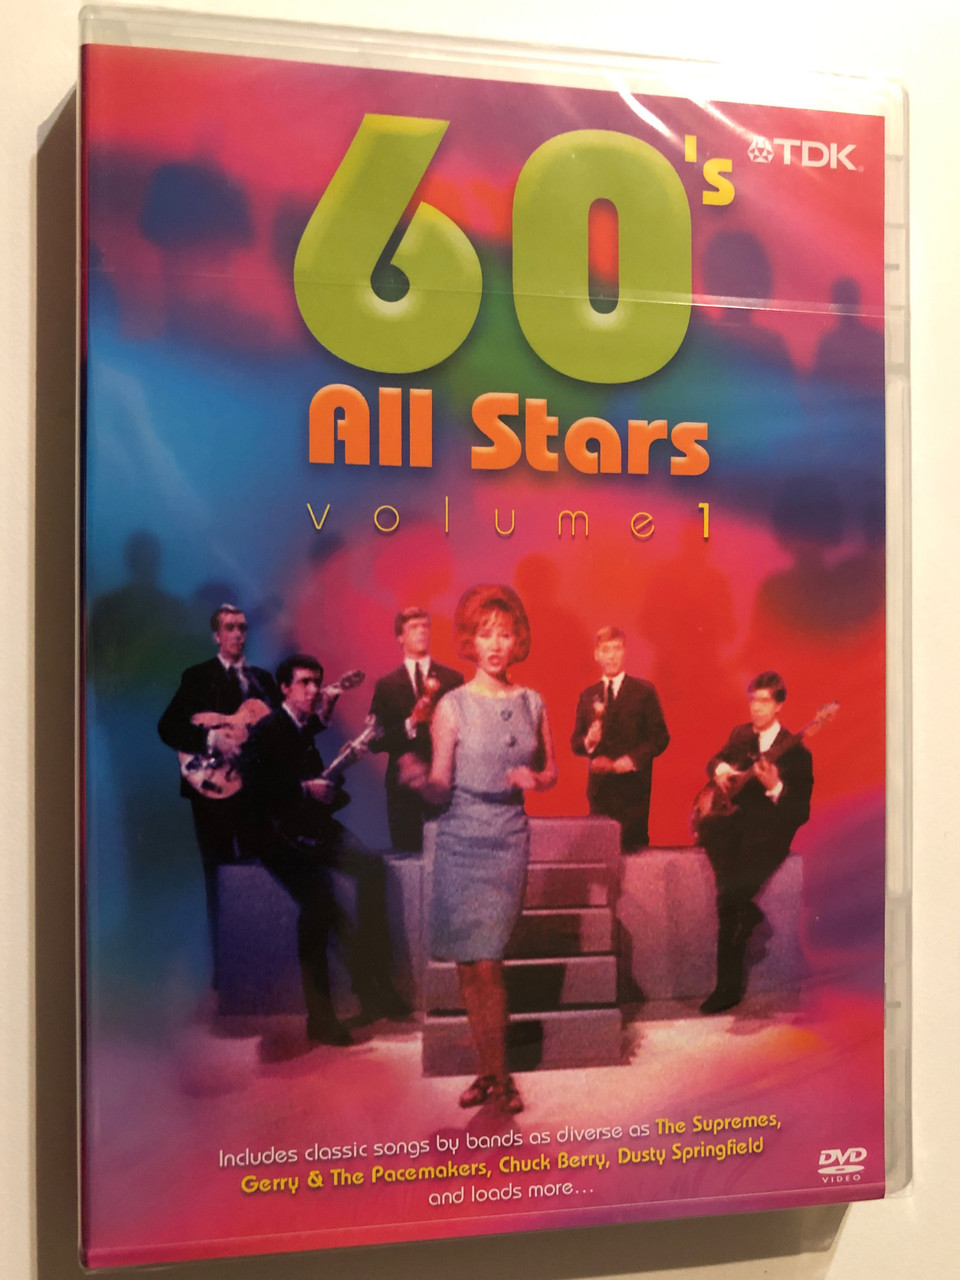 https://cdn10.bigcommerce.com/s-62bdpkt7pb/products/53482/images/271356/60s_All_Stars_Volume_1_Includes_Classic_Songs_by_Bands_as_diverse_as_The__74683.1680178942.1280.1280.JPG?c=2&_gl=1*1d8yn3o*_ga*MzA5MjcwMDY5LjE2Nzk3NDk1MDE.*_ga_WS2VZYPC6G*MTY4MDE3NjQ4NS41LjEuMTY4MDE3ODk0Ni4yMS4wLjA.